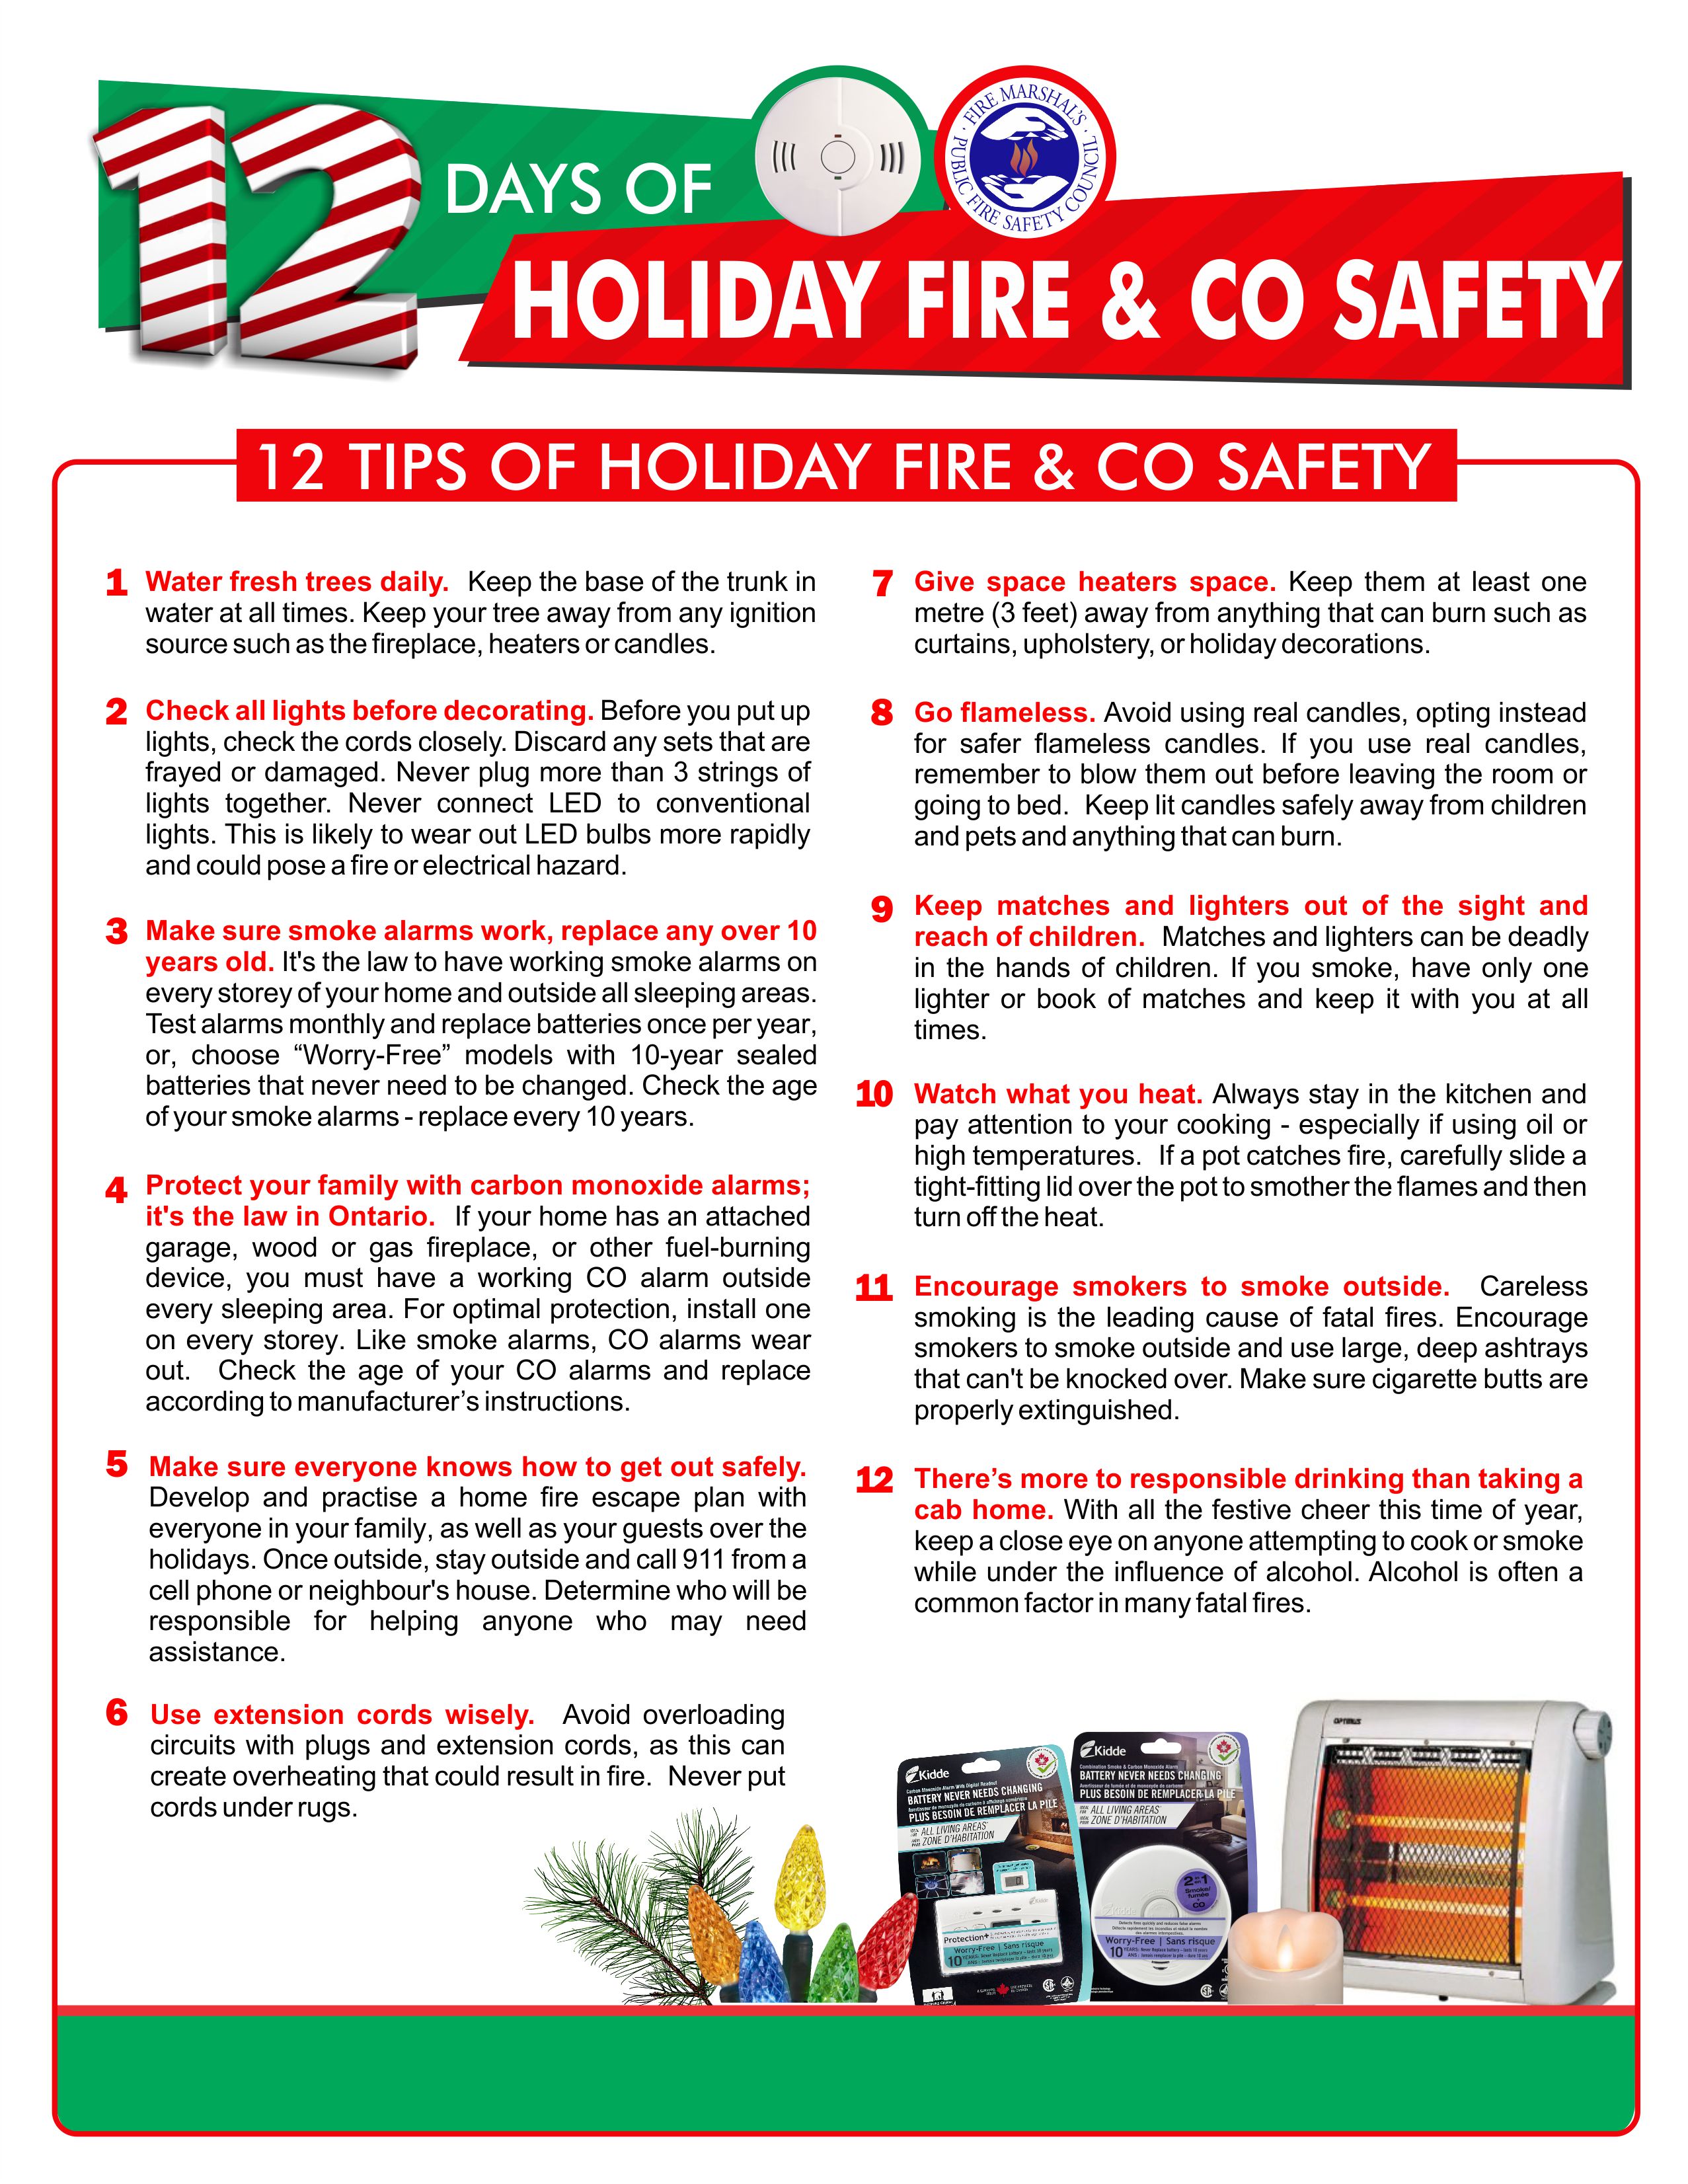 12 Days of Holiday Fire Safety - 12 Safety Tips.jpg